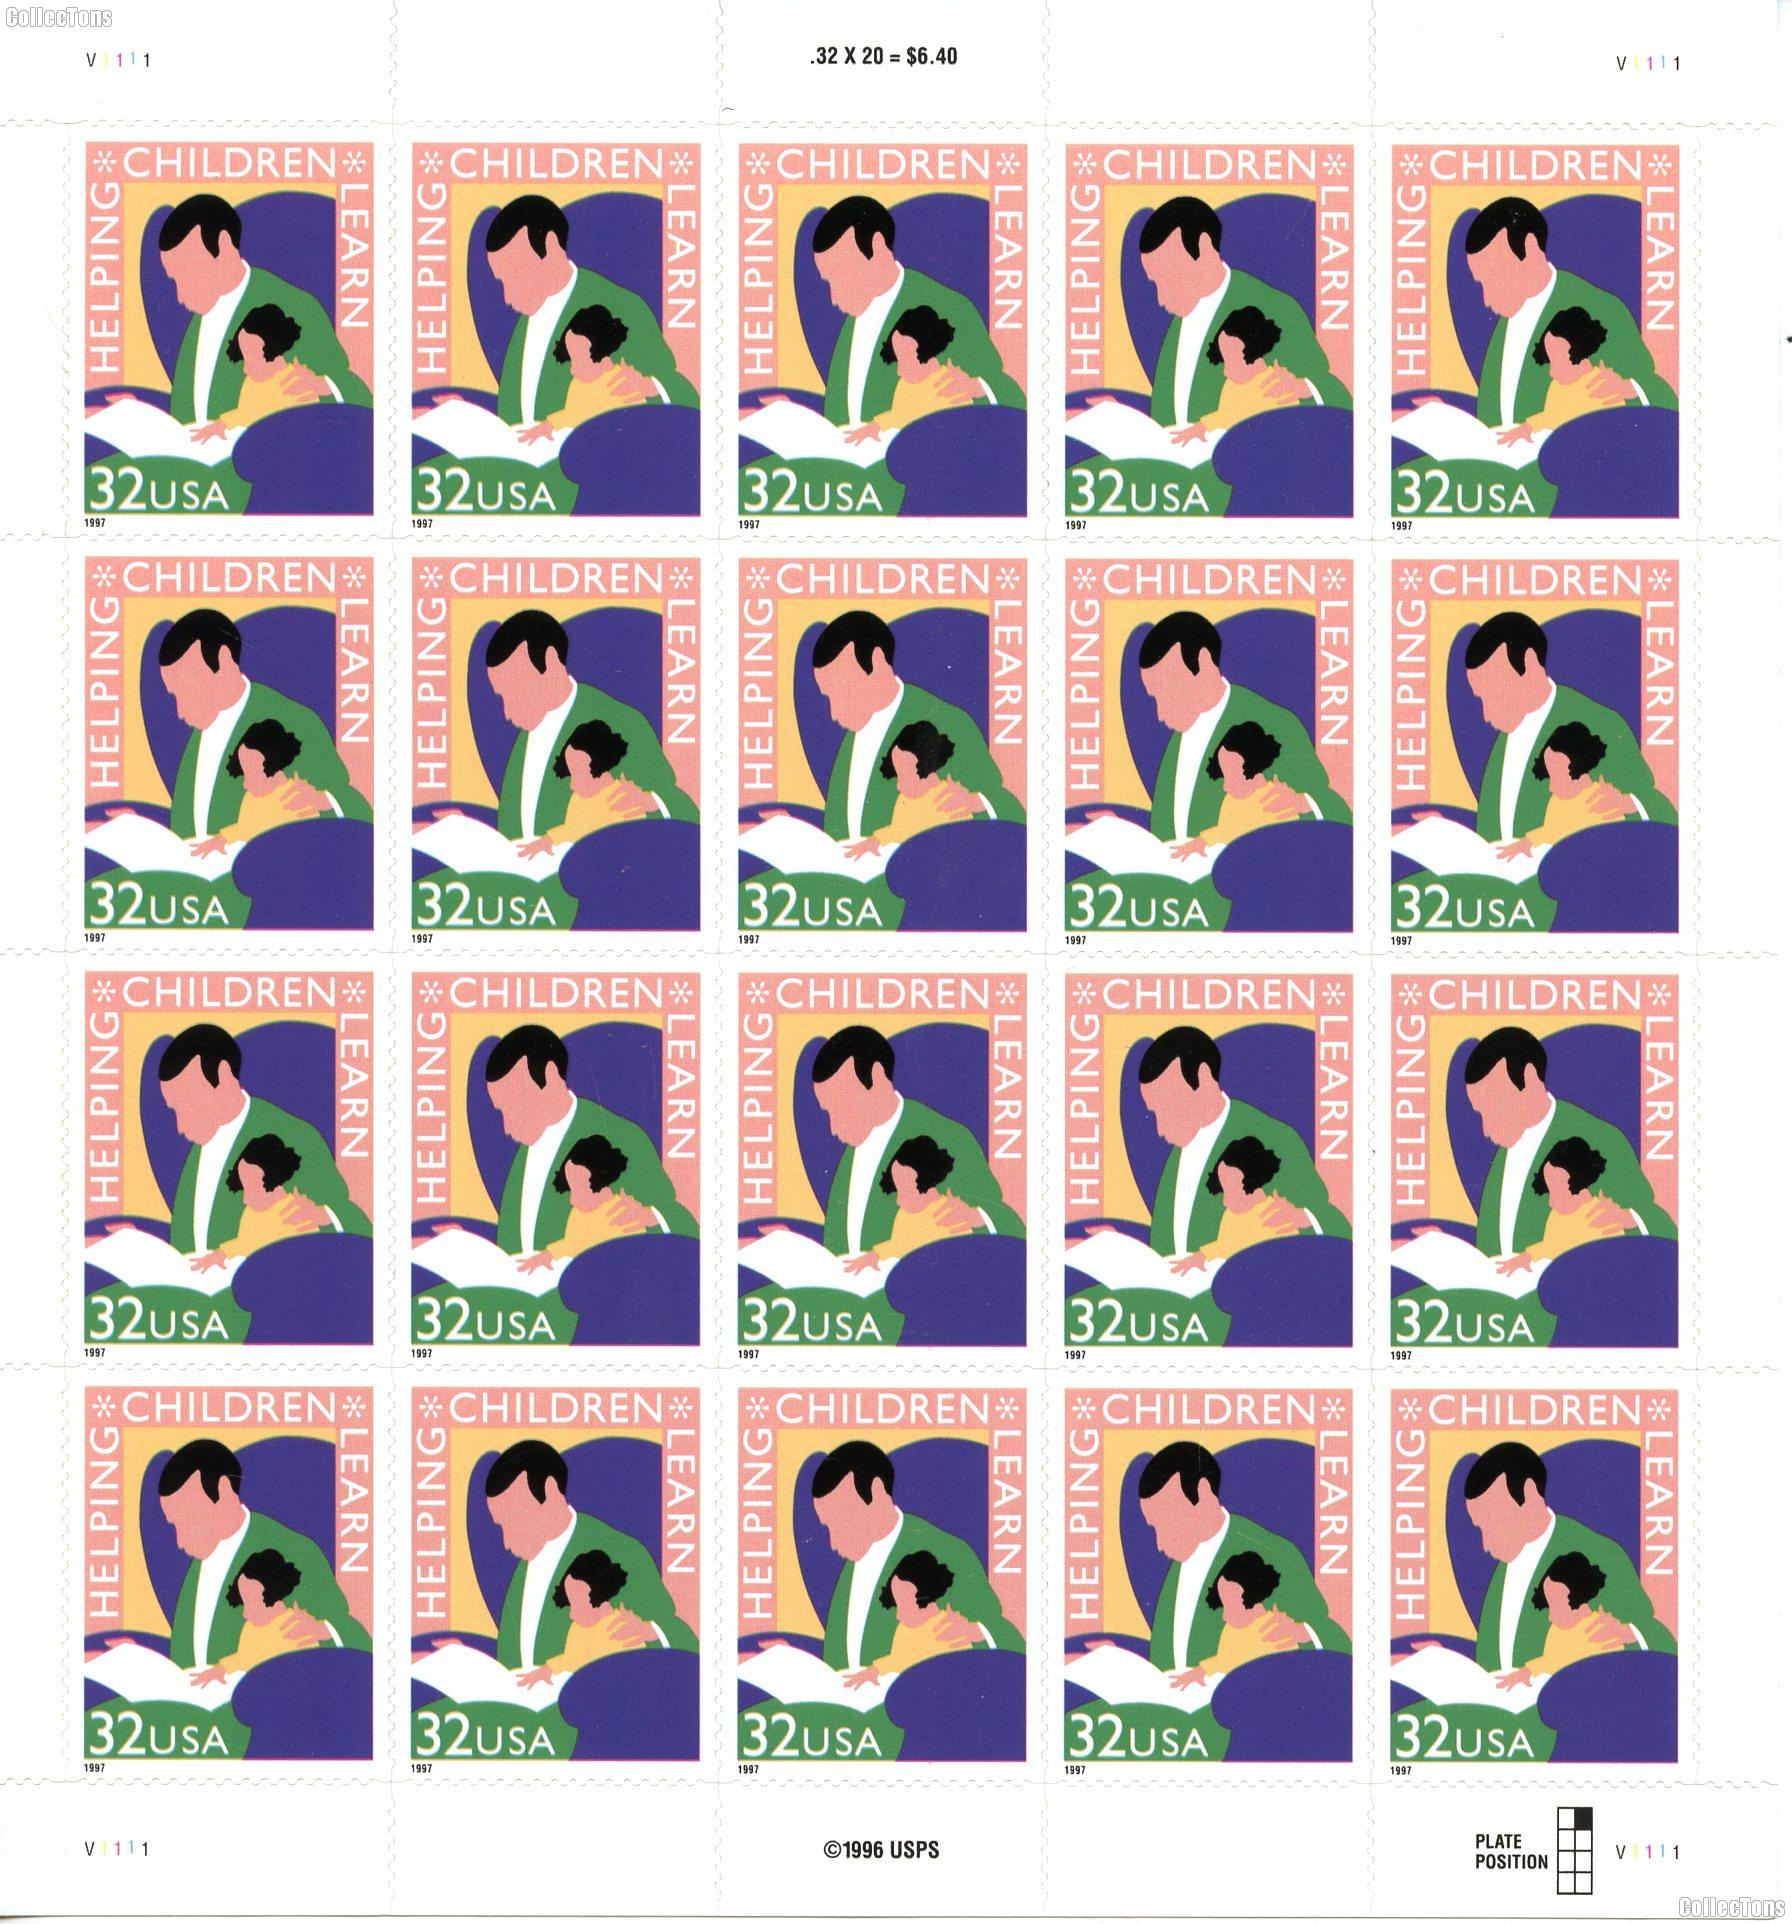 1997 Helping Children Learn 32 Cent US Postage Stamp Unused Sheet of 20 Scott #3125